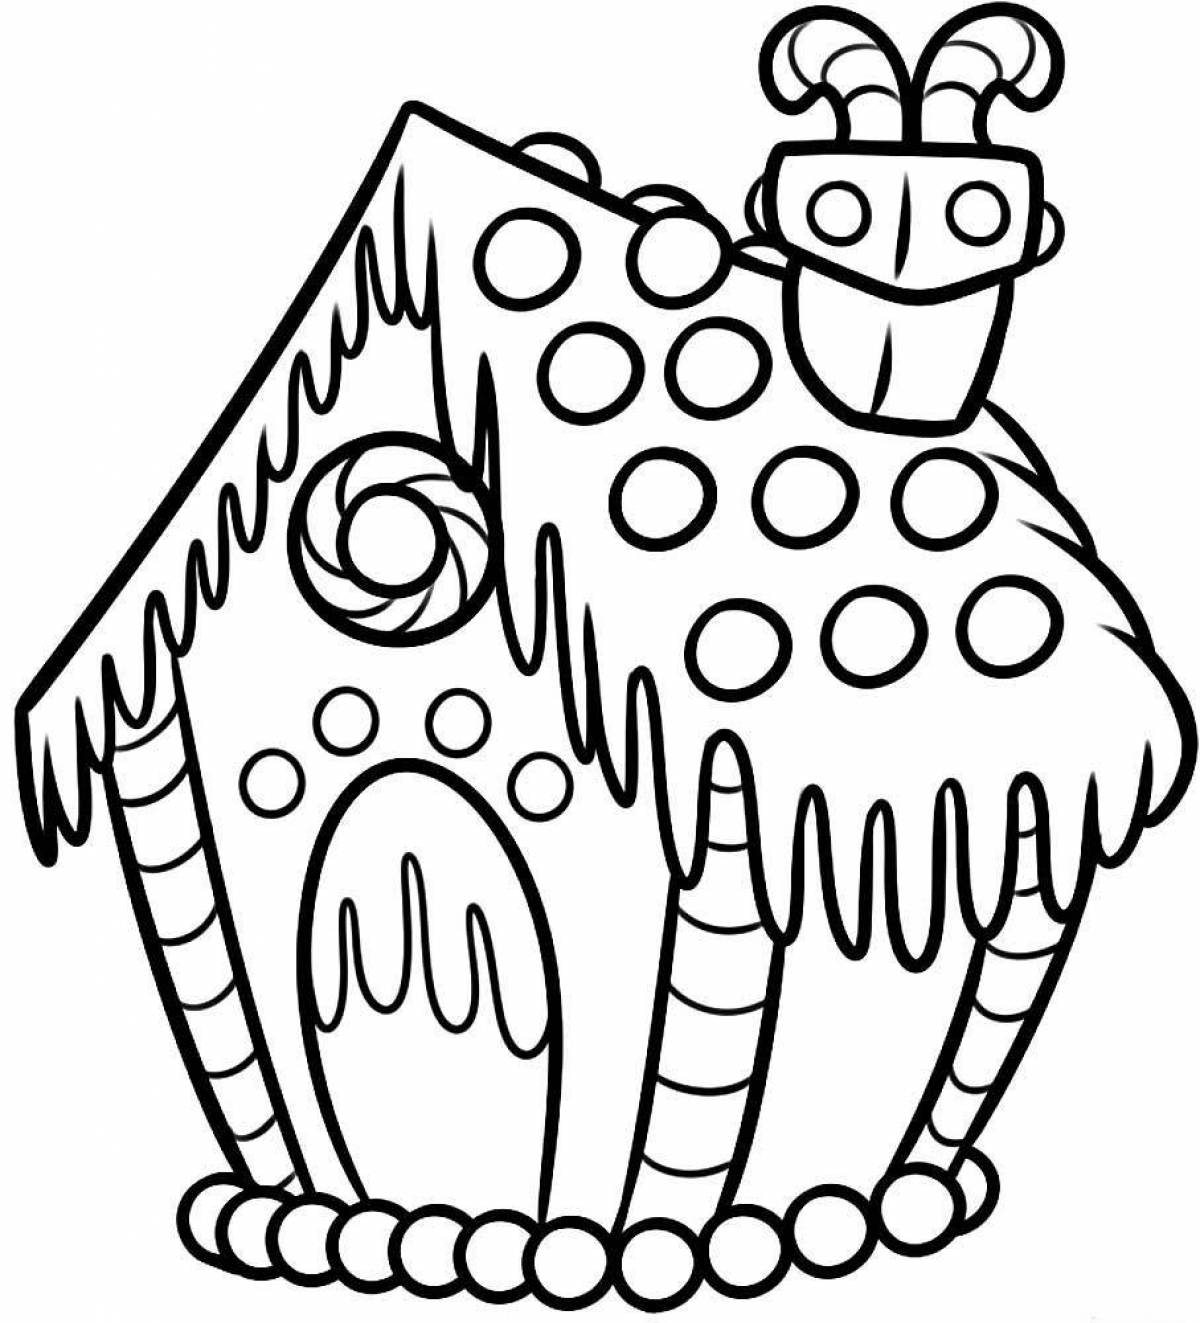 Coloring page festive gingerbread house